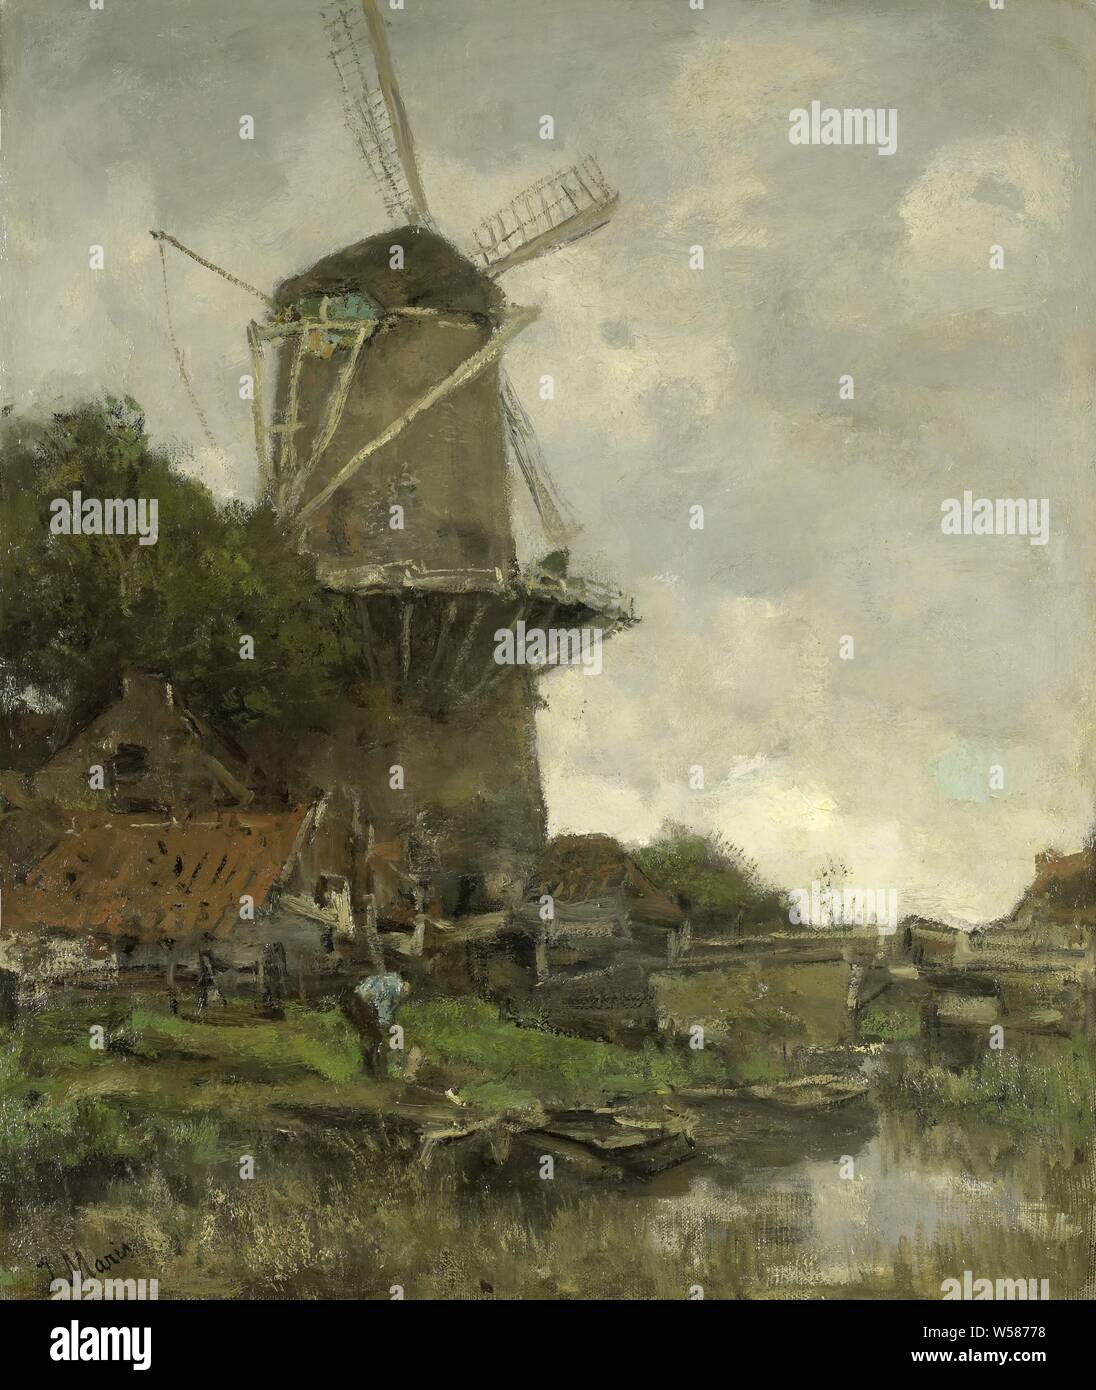 The Windmill, View of a post mill behind some houses and trees near a canal. On the left side of the bank a man is bent over by a flat barge., Jacob Maris, c. 1880 - c. 1886, canvas, oil paint (paint), h 59.5 cm × w 50 cm × t 3.3 cm d 12 cm Stock Photo